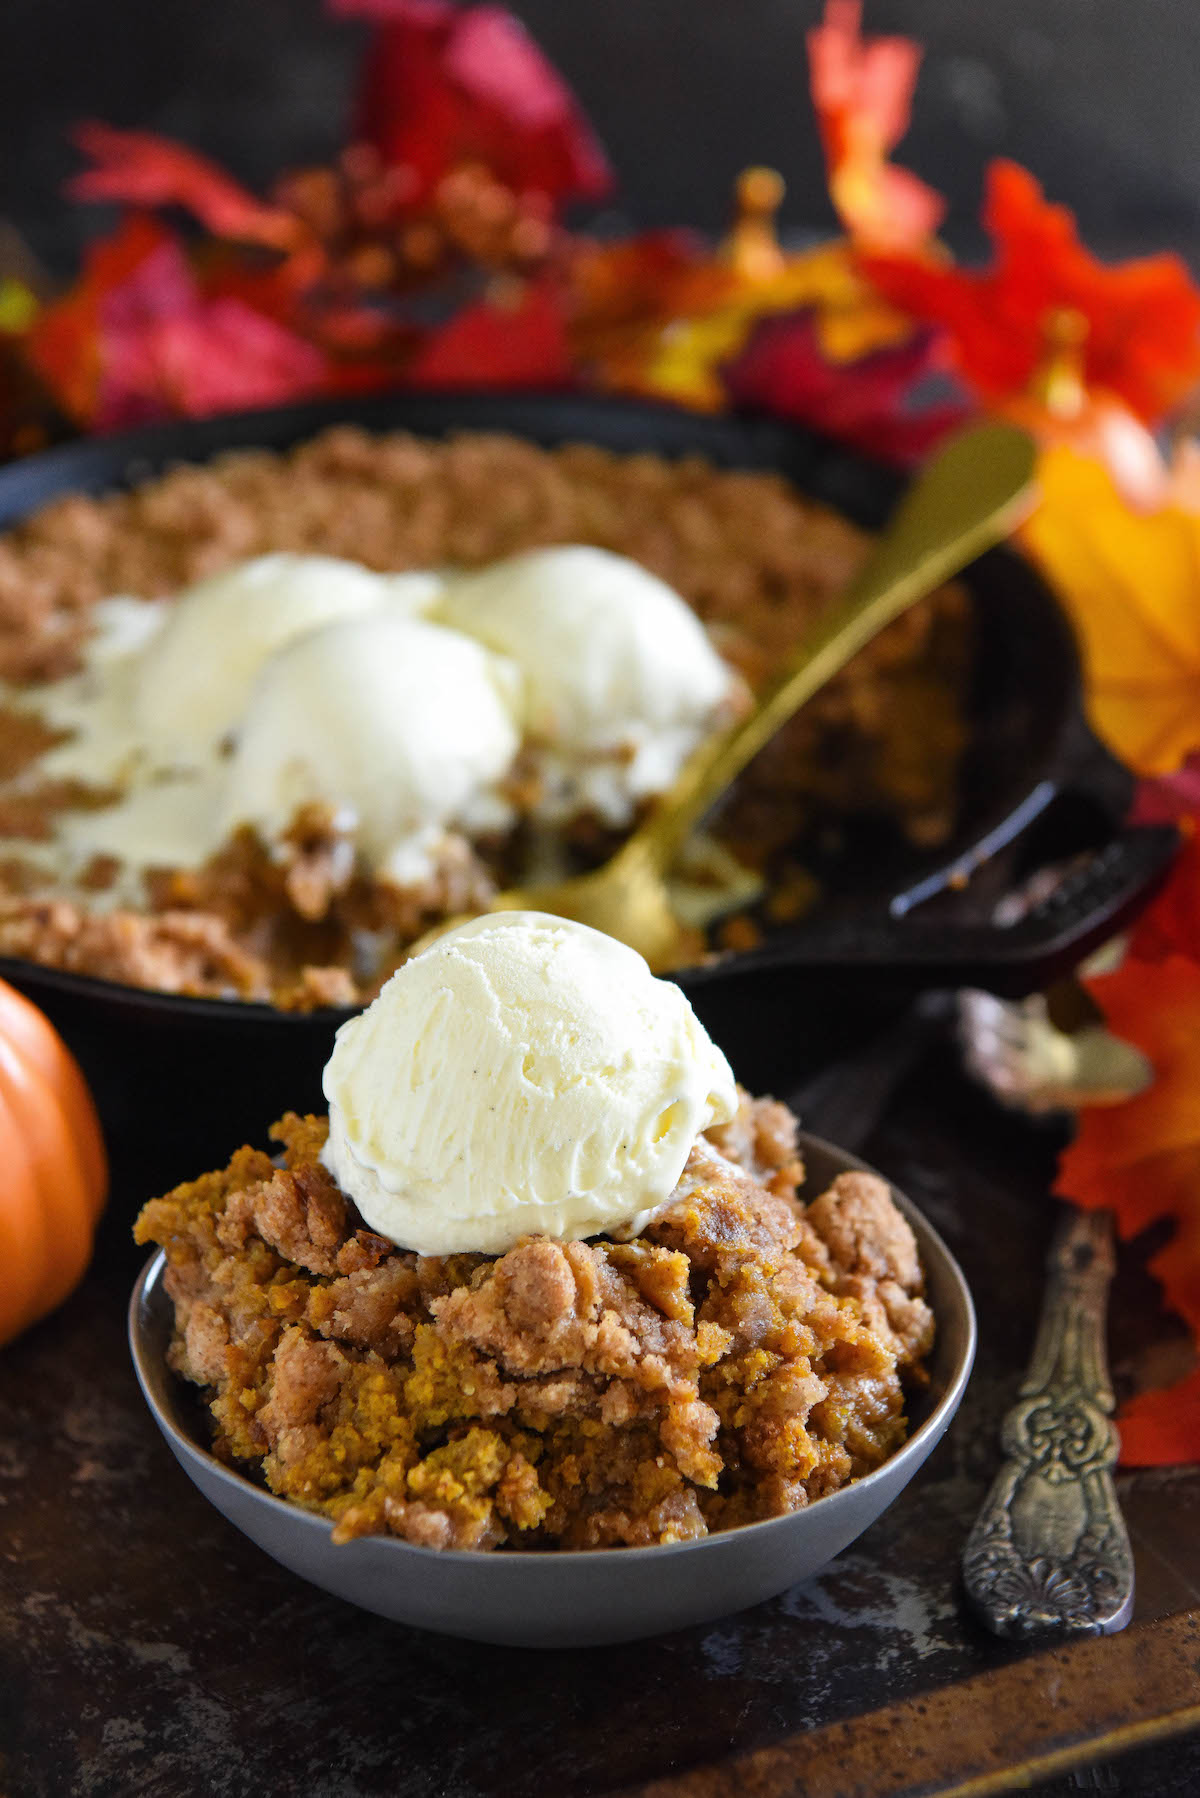 A cast iron skillet filled with pumpkin crisp and a serving in a bowl with a scoop of ice cream on top.